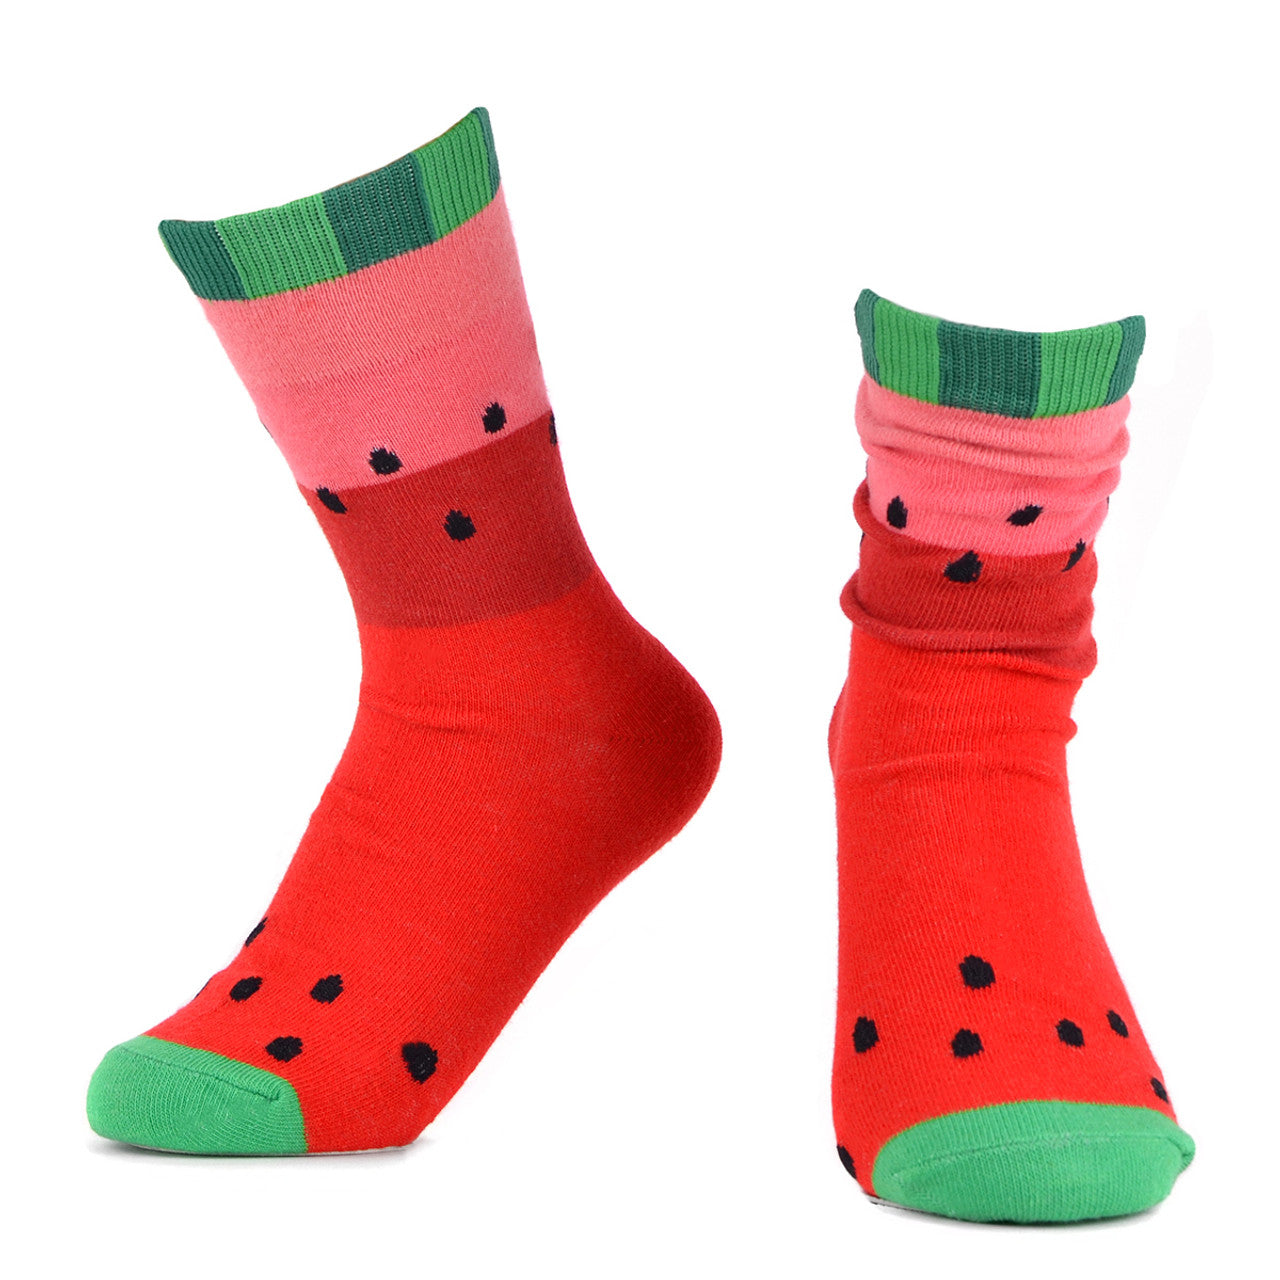 Vibrant red ankle socks with a watermelon-inspired design, featuring a green cuff, black seed details over the red base, and a green toe cap.